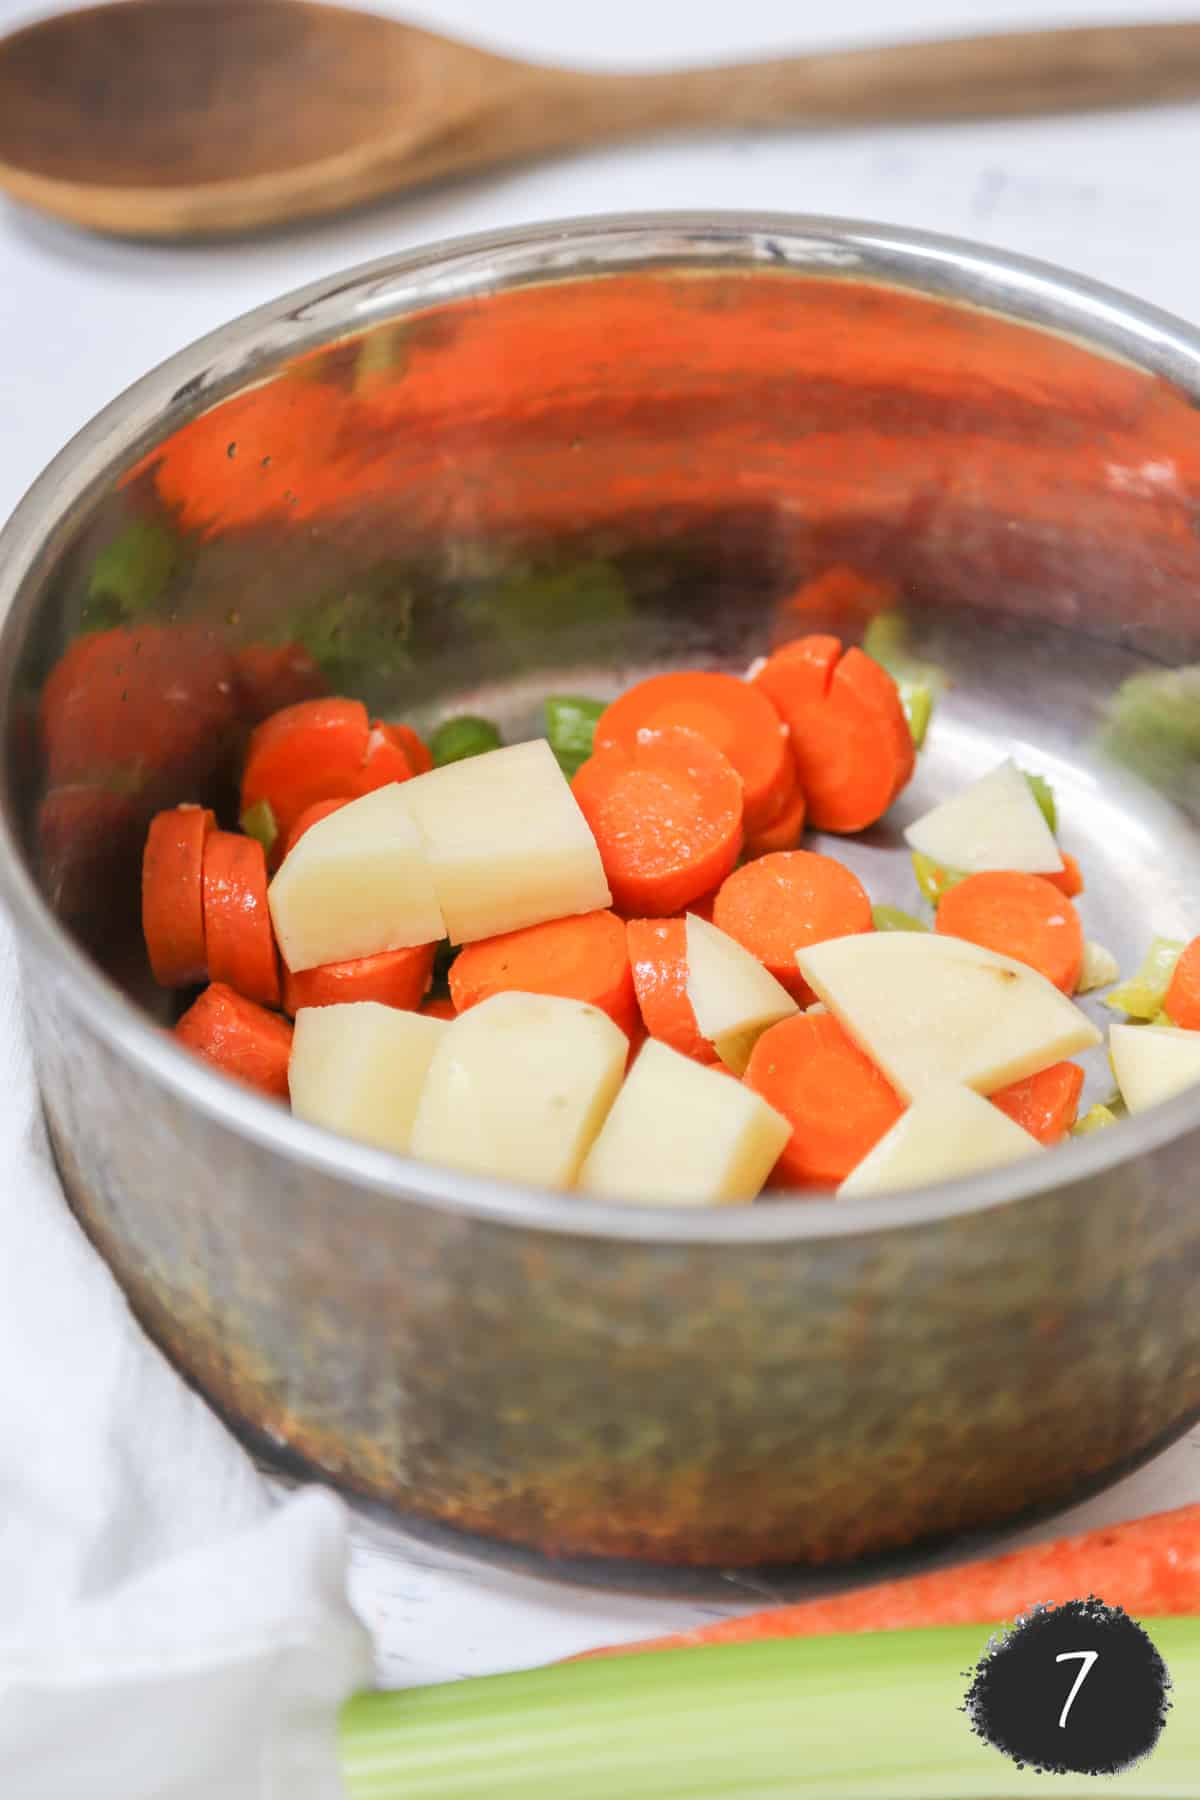 Diced potato, carrot, and celery in a copper pot.